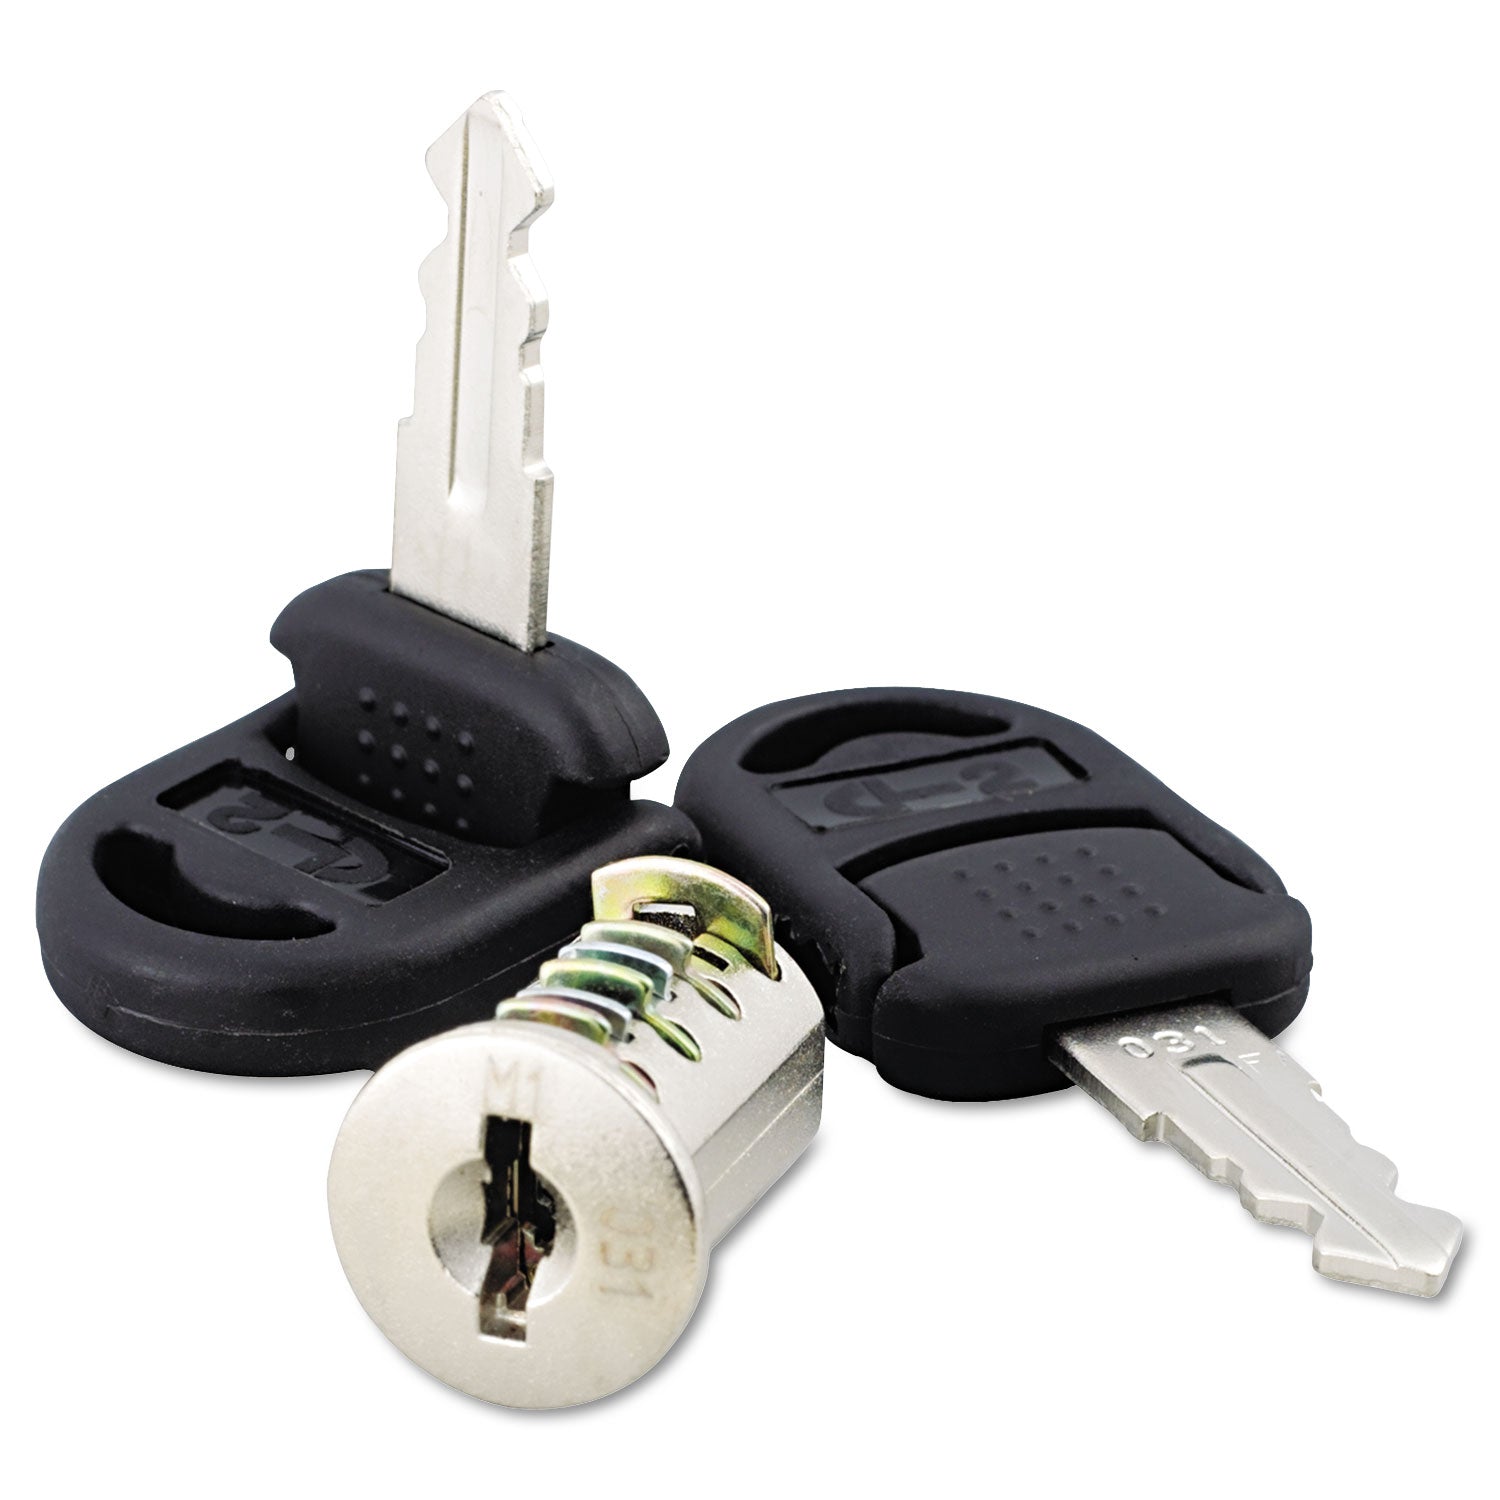 Core Removable Lock and Key Set, Silver, 2 Keys - 